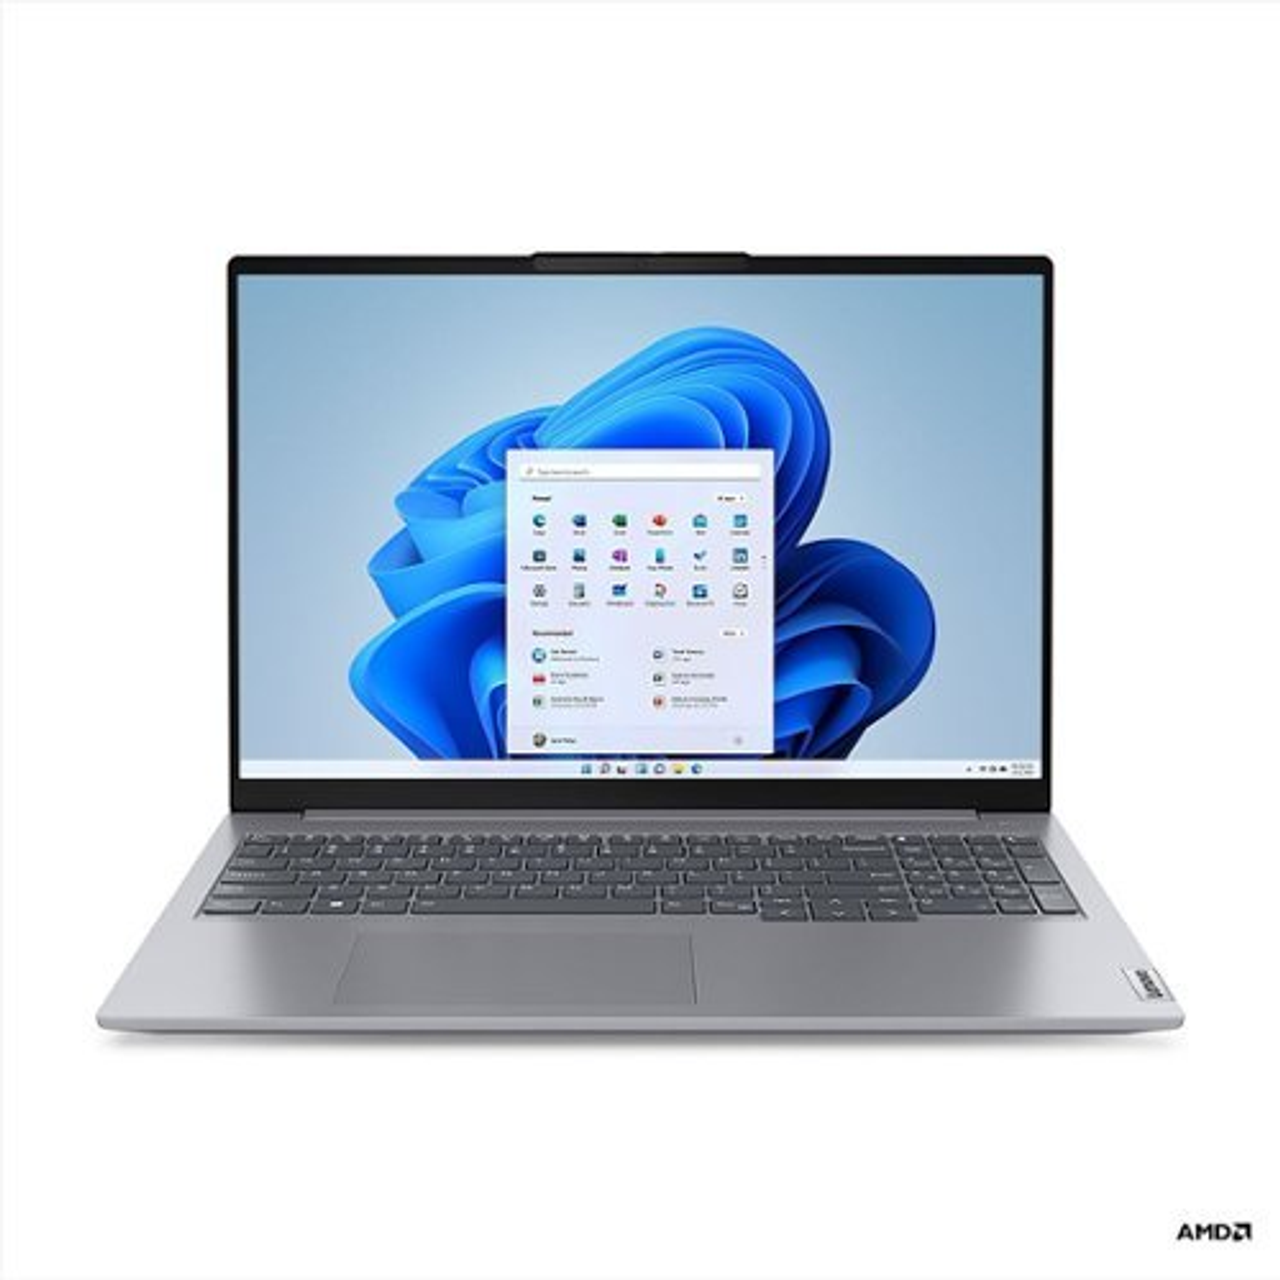 Lenovo - ThinkBook 16 G6 ABP (AMD) in 16" Touch-screen Notebook - AMD Ryzen 7 with 16GB Memory - 512GB SSD - Gray